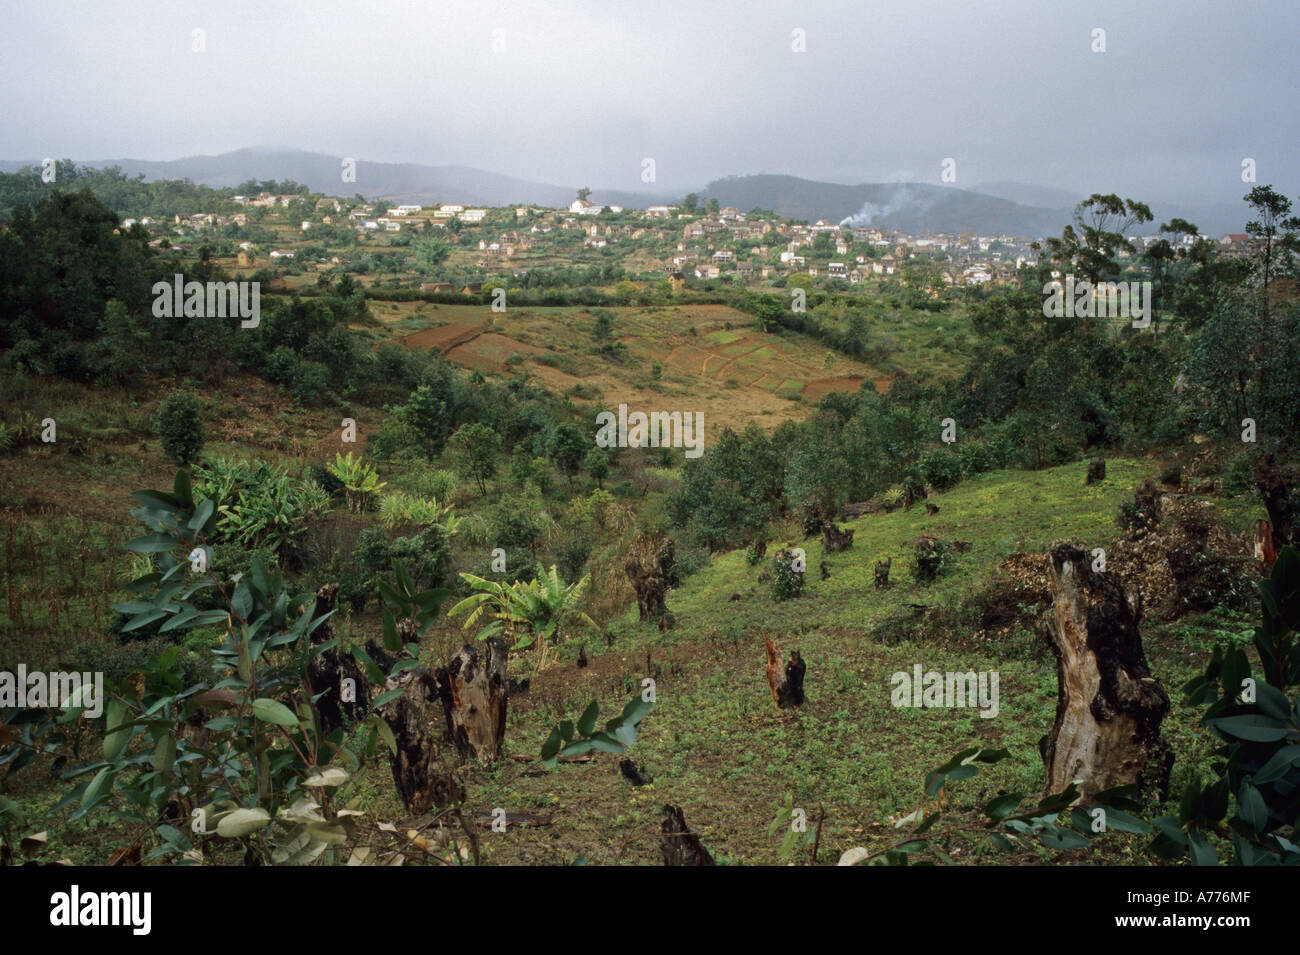 Deforested hills in central Madagascar with small town in distance Stock Photo